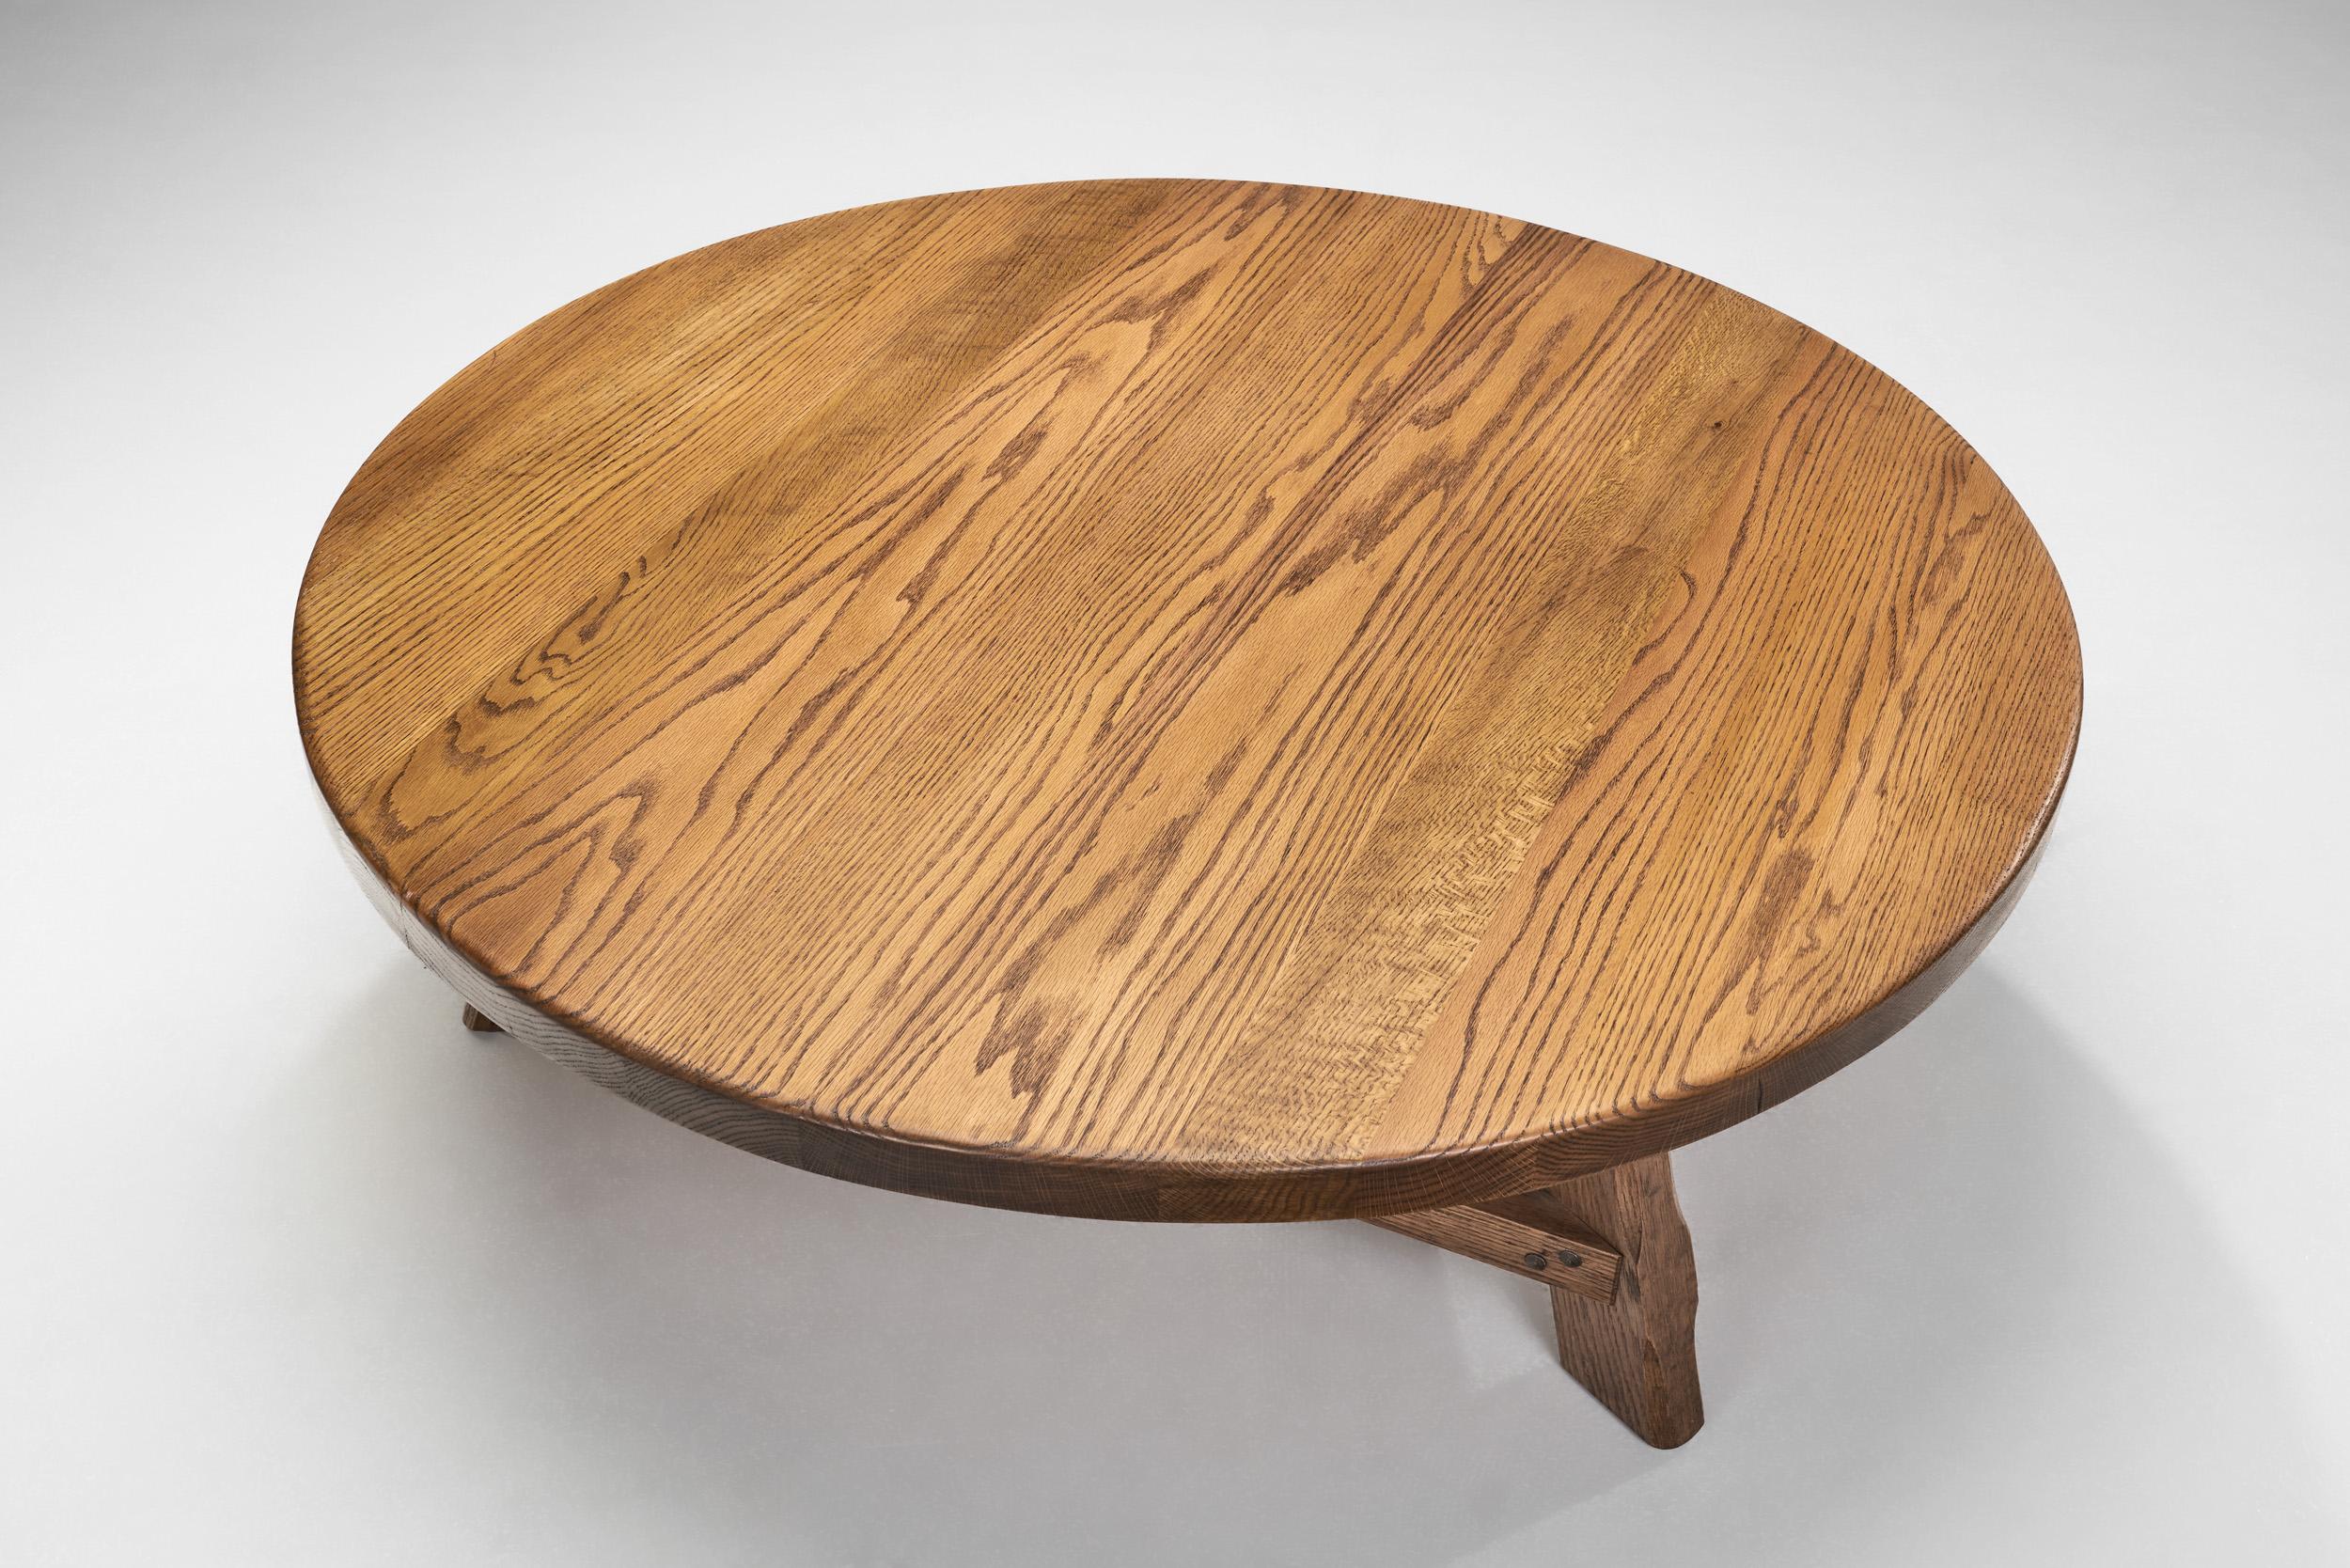 Brutalist Oak Coffee Table with Triangular Legs, Europe ca 1950s For Sale 2